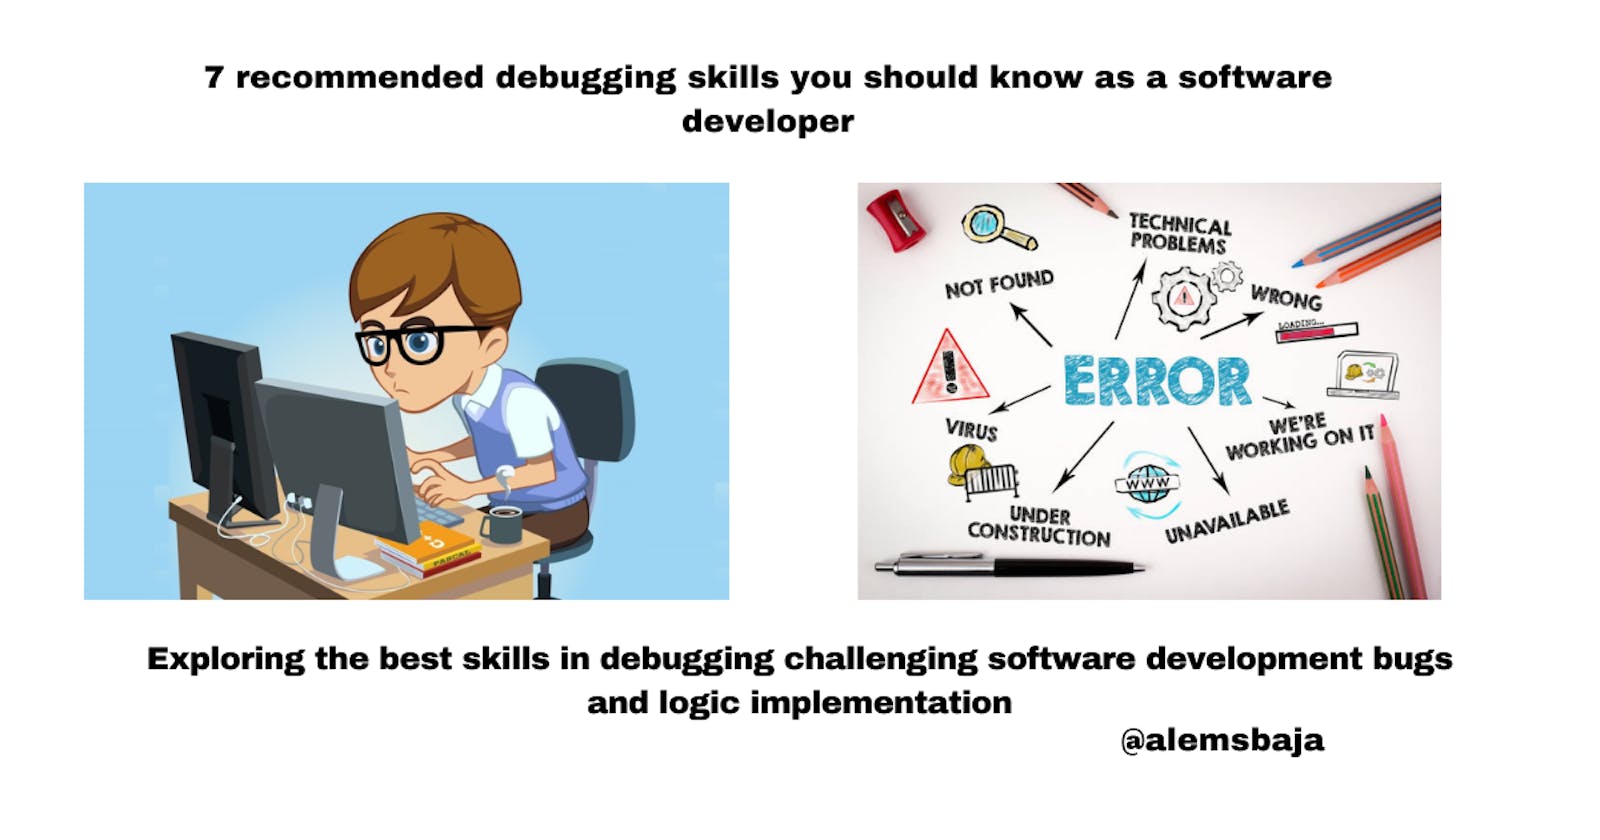 7 recommended debugging skills you should know as a software developer